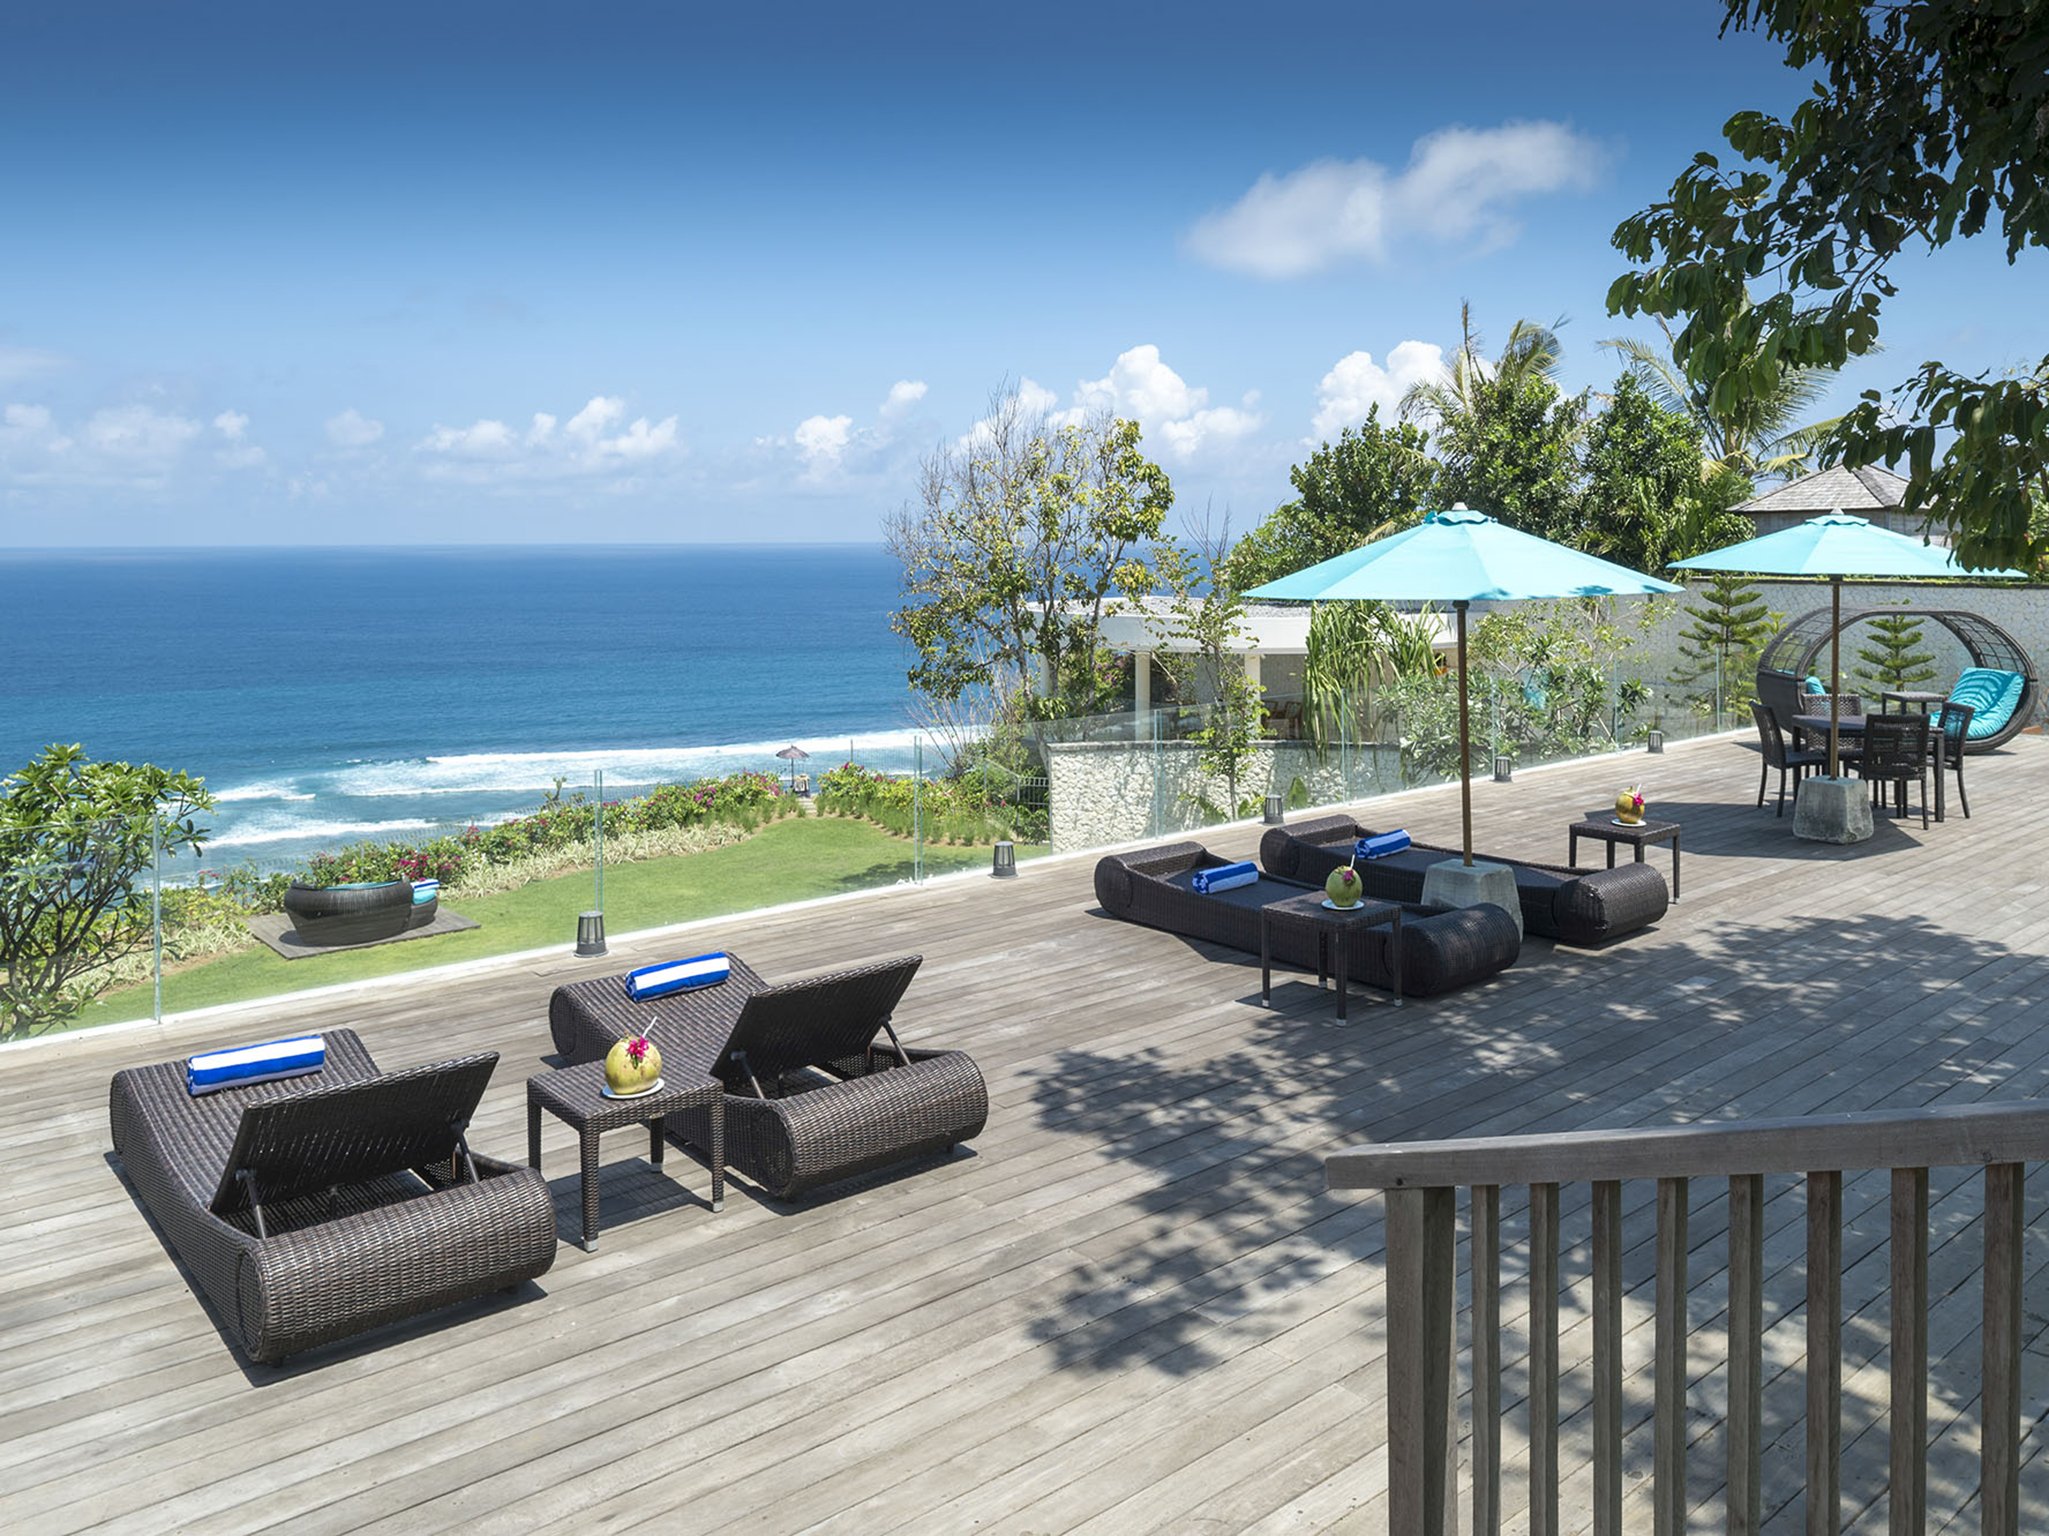 Majestic Cliff Views, Image from Pandawa Cliff Estate website